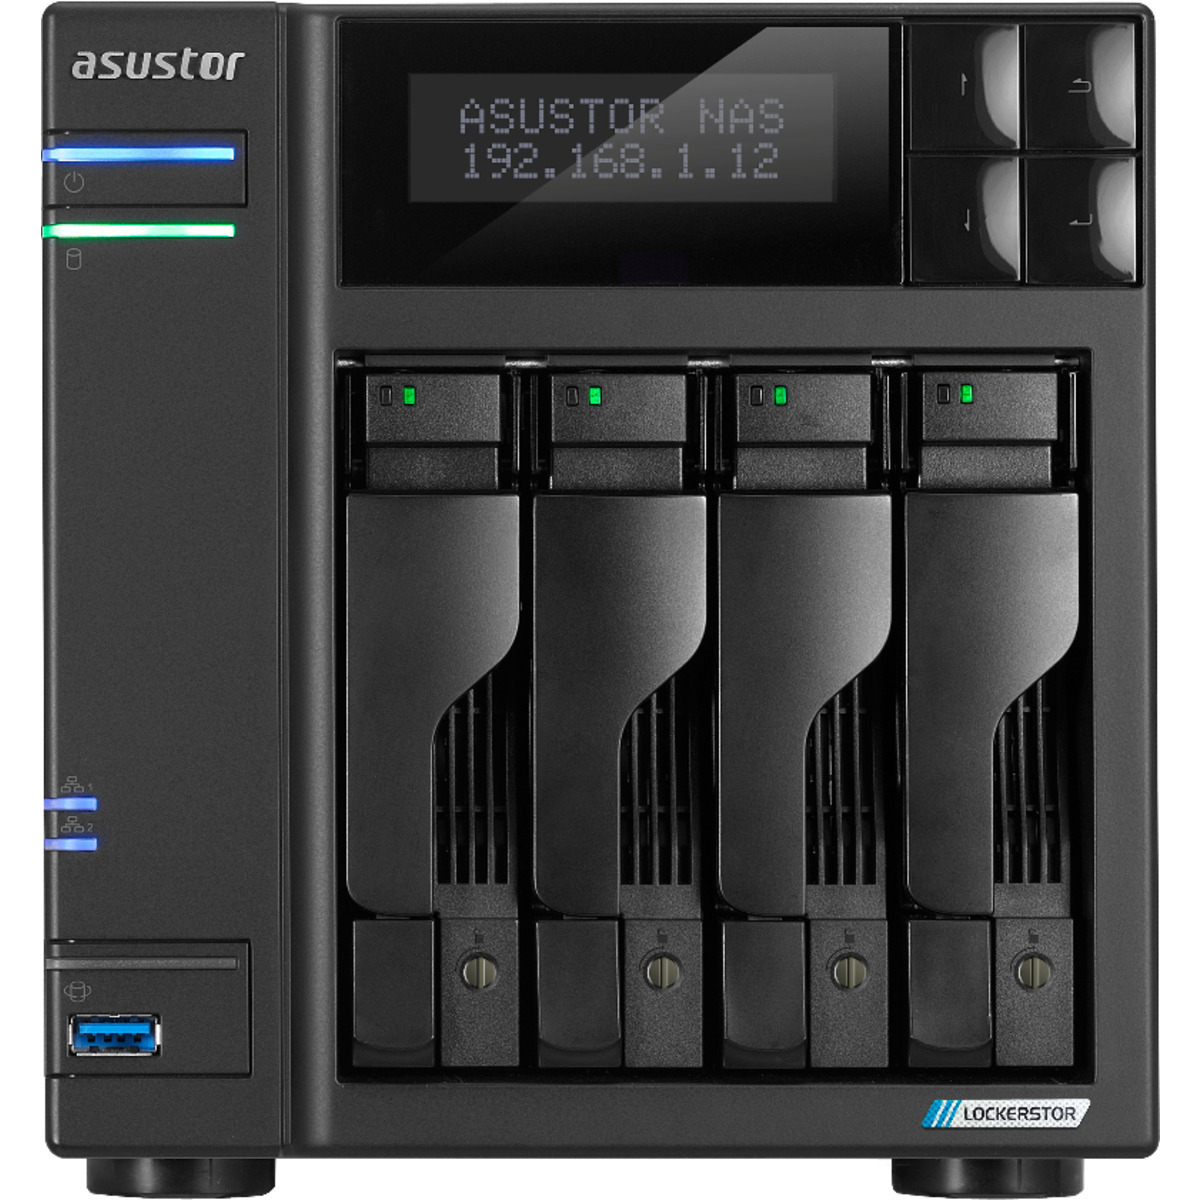 ASUSTOR LOCKERSTOR 4 Gen2 AS6704T 24tb 4-Bay Desktop Multimedia / Power User / Business NAS - Network Attached Storage Device 4x6tb Western Digital Red Plus WD60EFPX 3.5 5640rpm SATA 6Gb/s HDD NAS Class Drives Installed - Burn-In Tested - FREE RAM UPGRADE LOCKERSTOR 4 Gen2 AS6704T